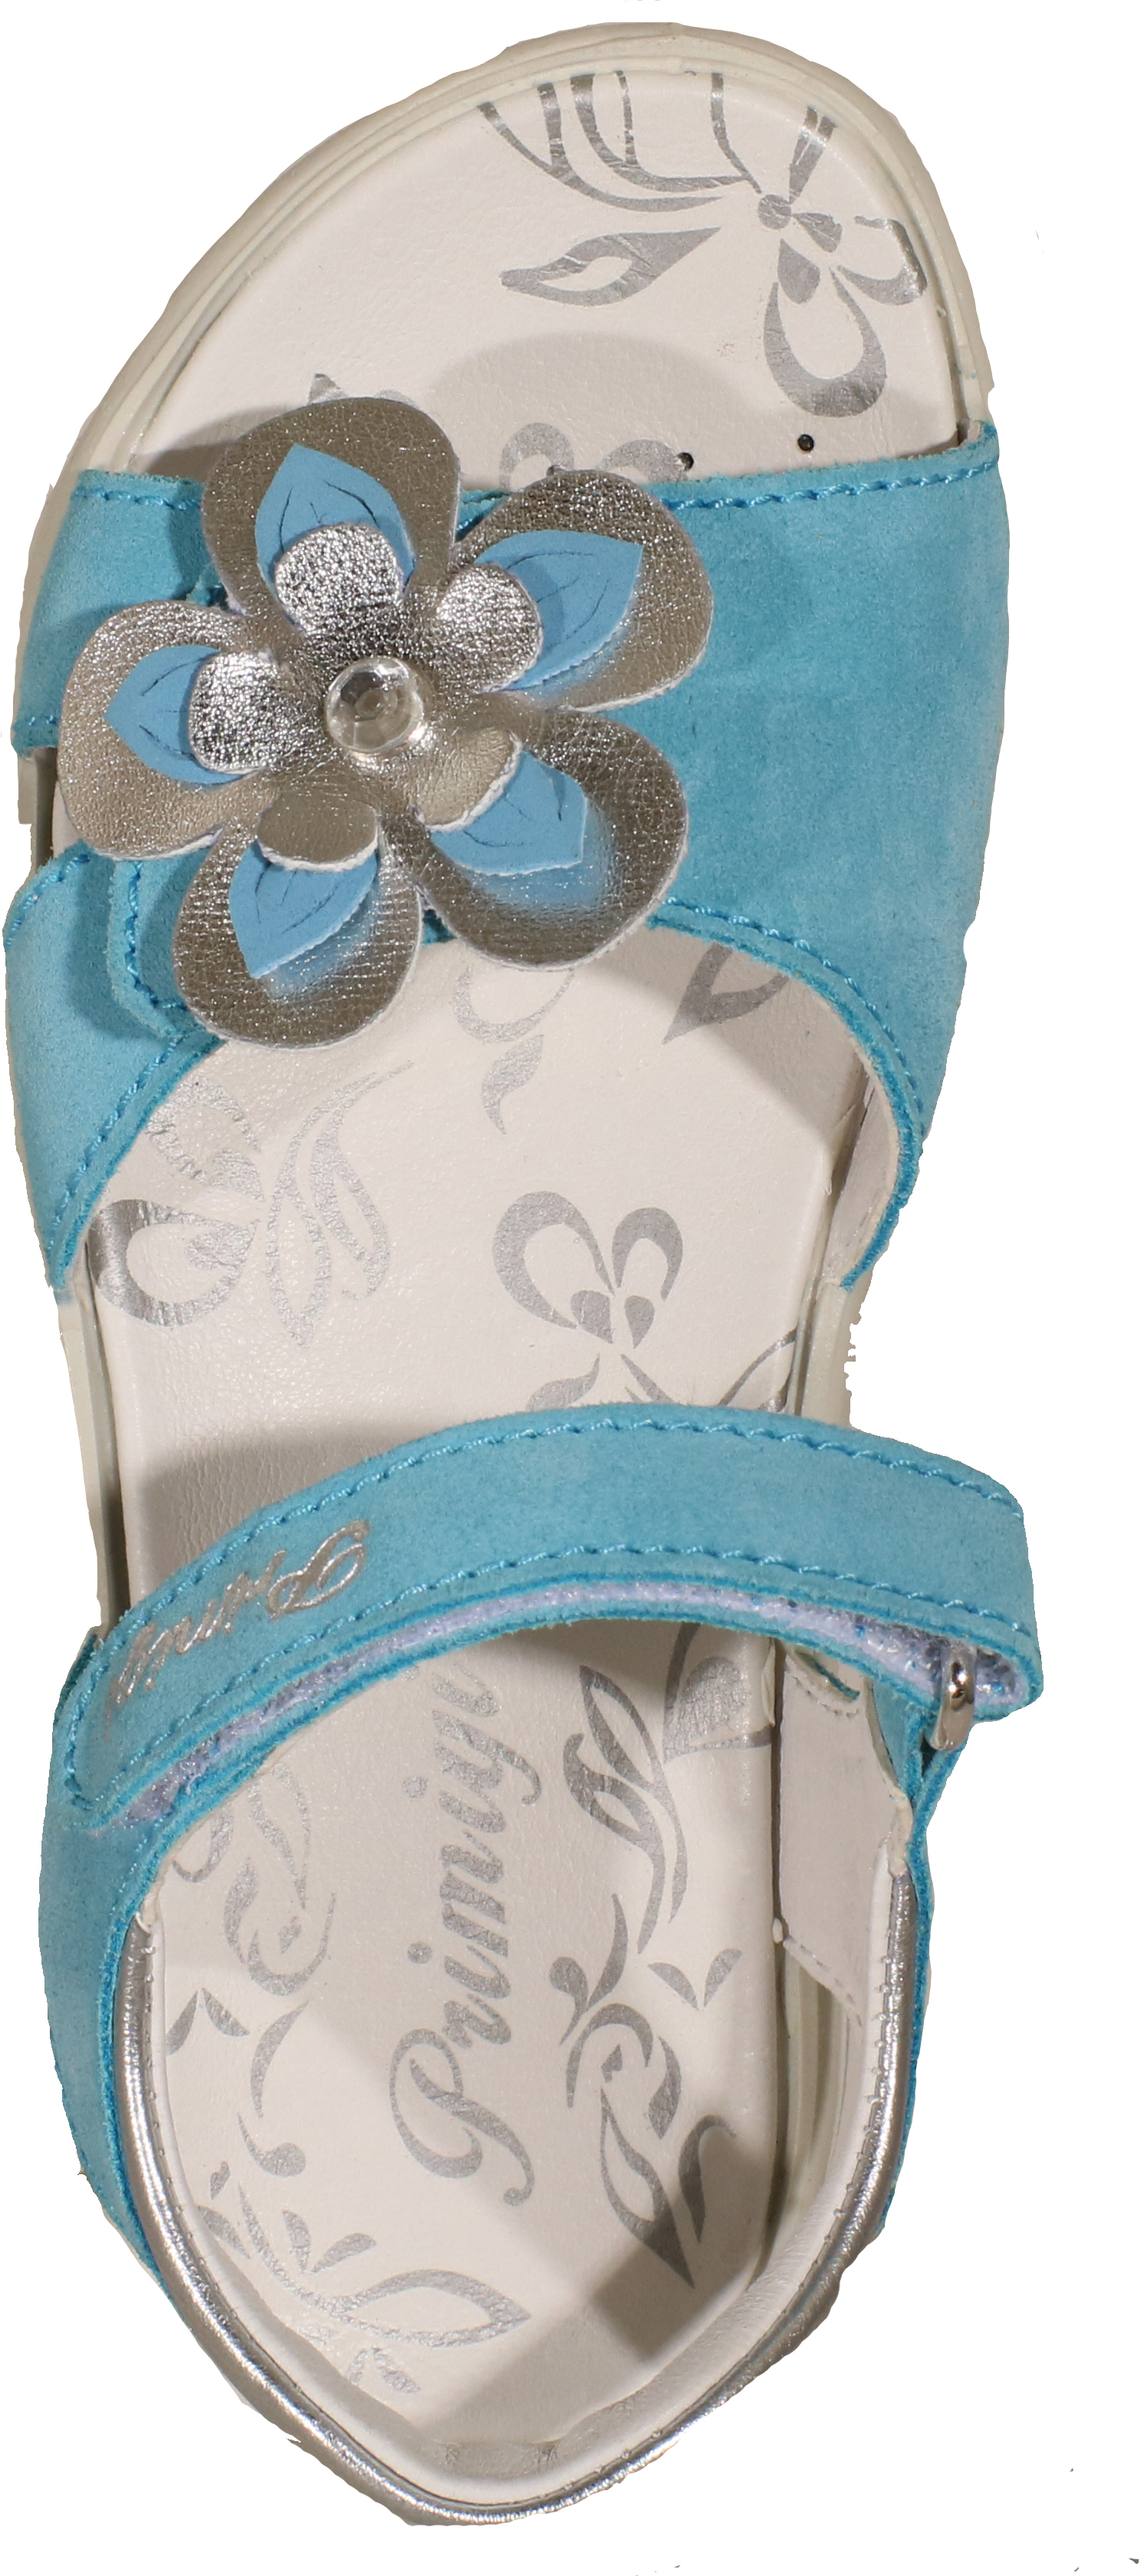 73914 - Turquoise / Silver suede leather